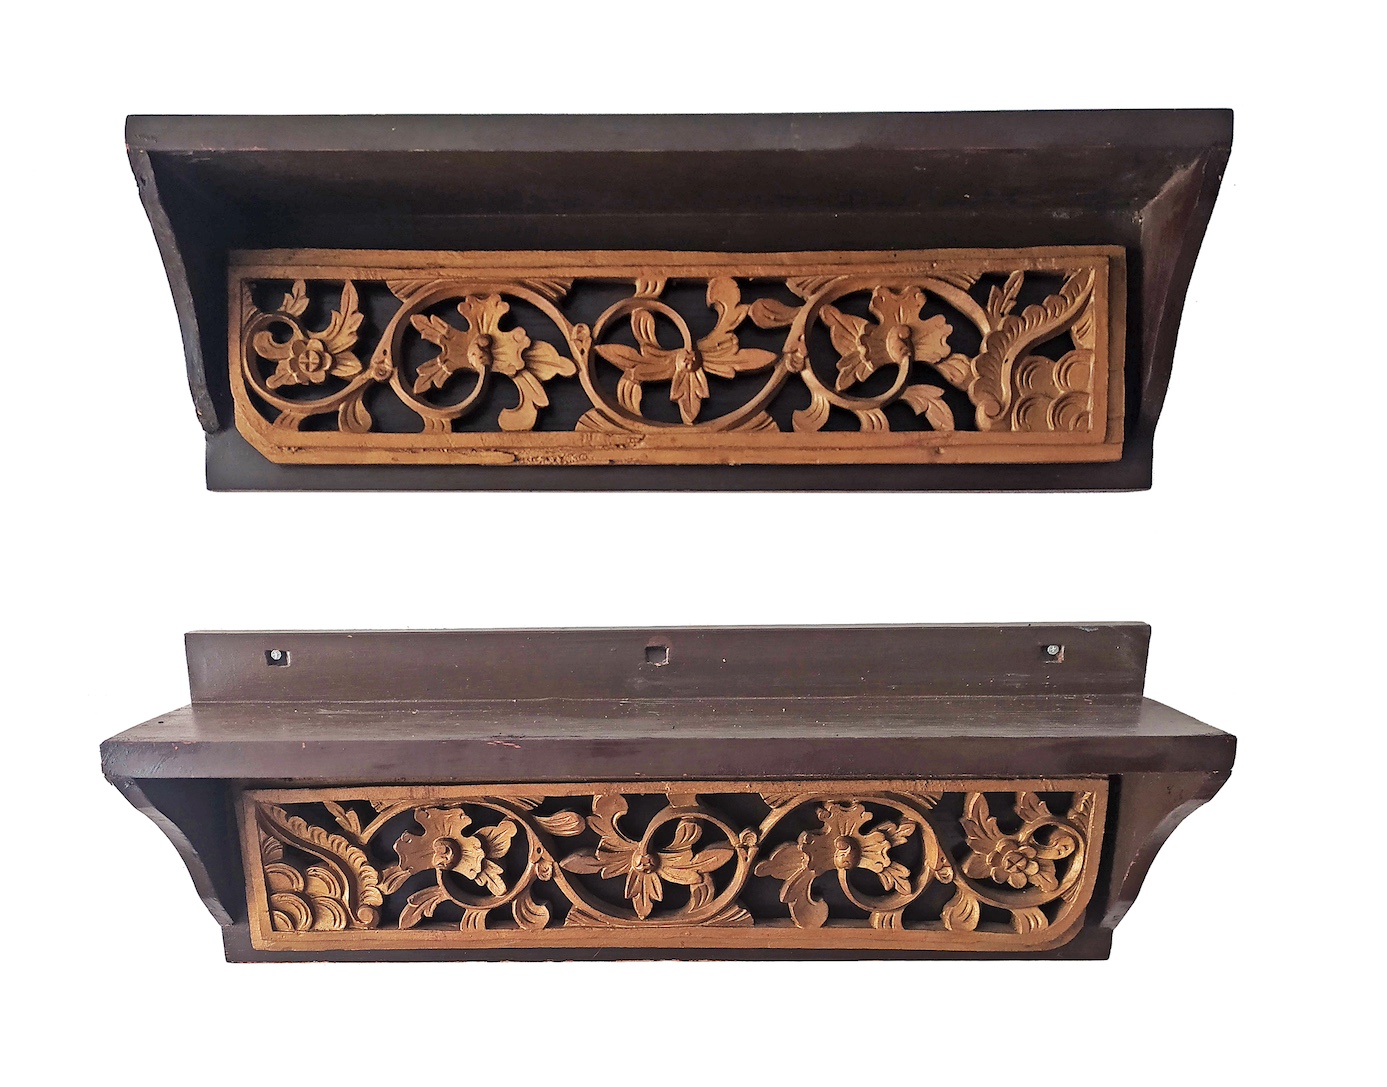 A pair of carved gilt wood wall racks